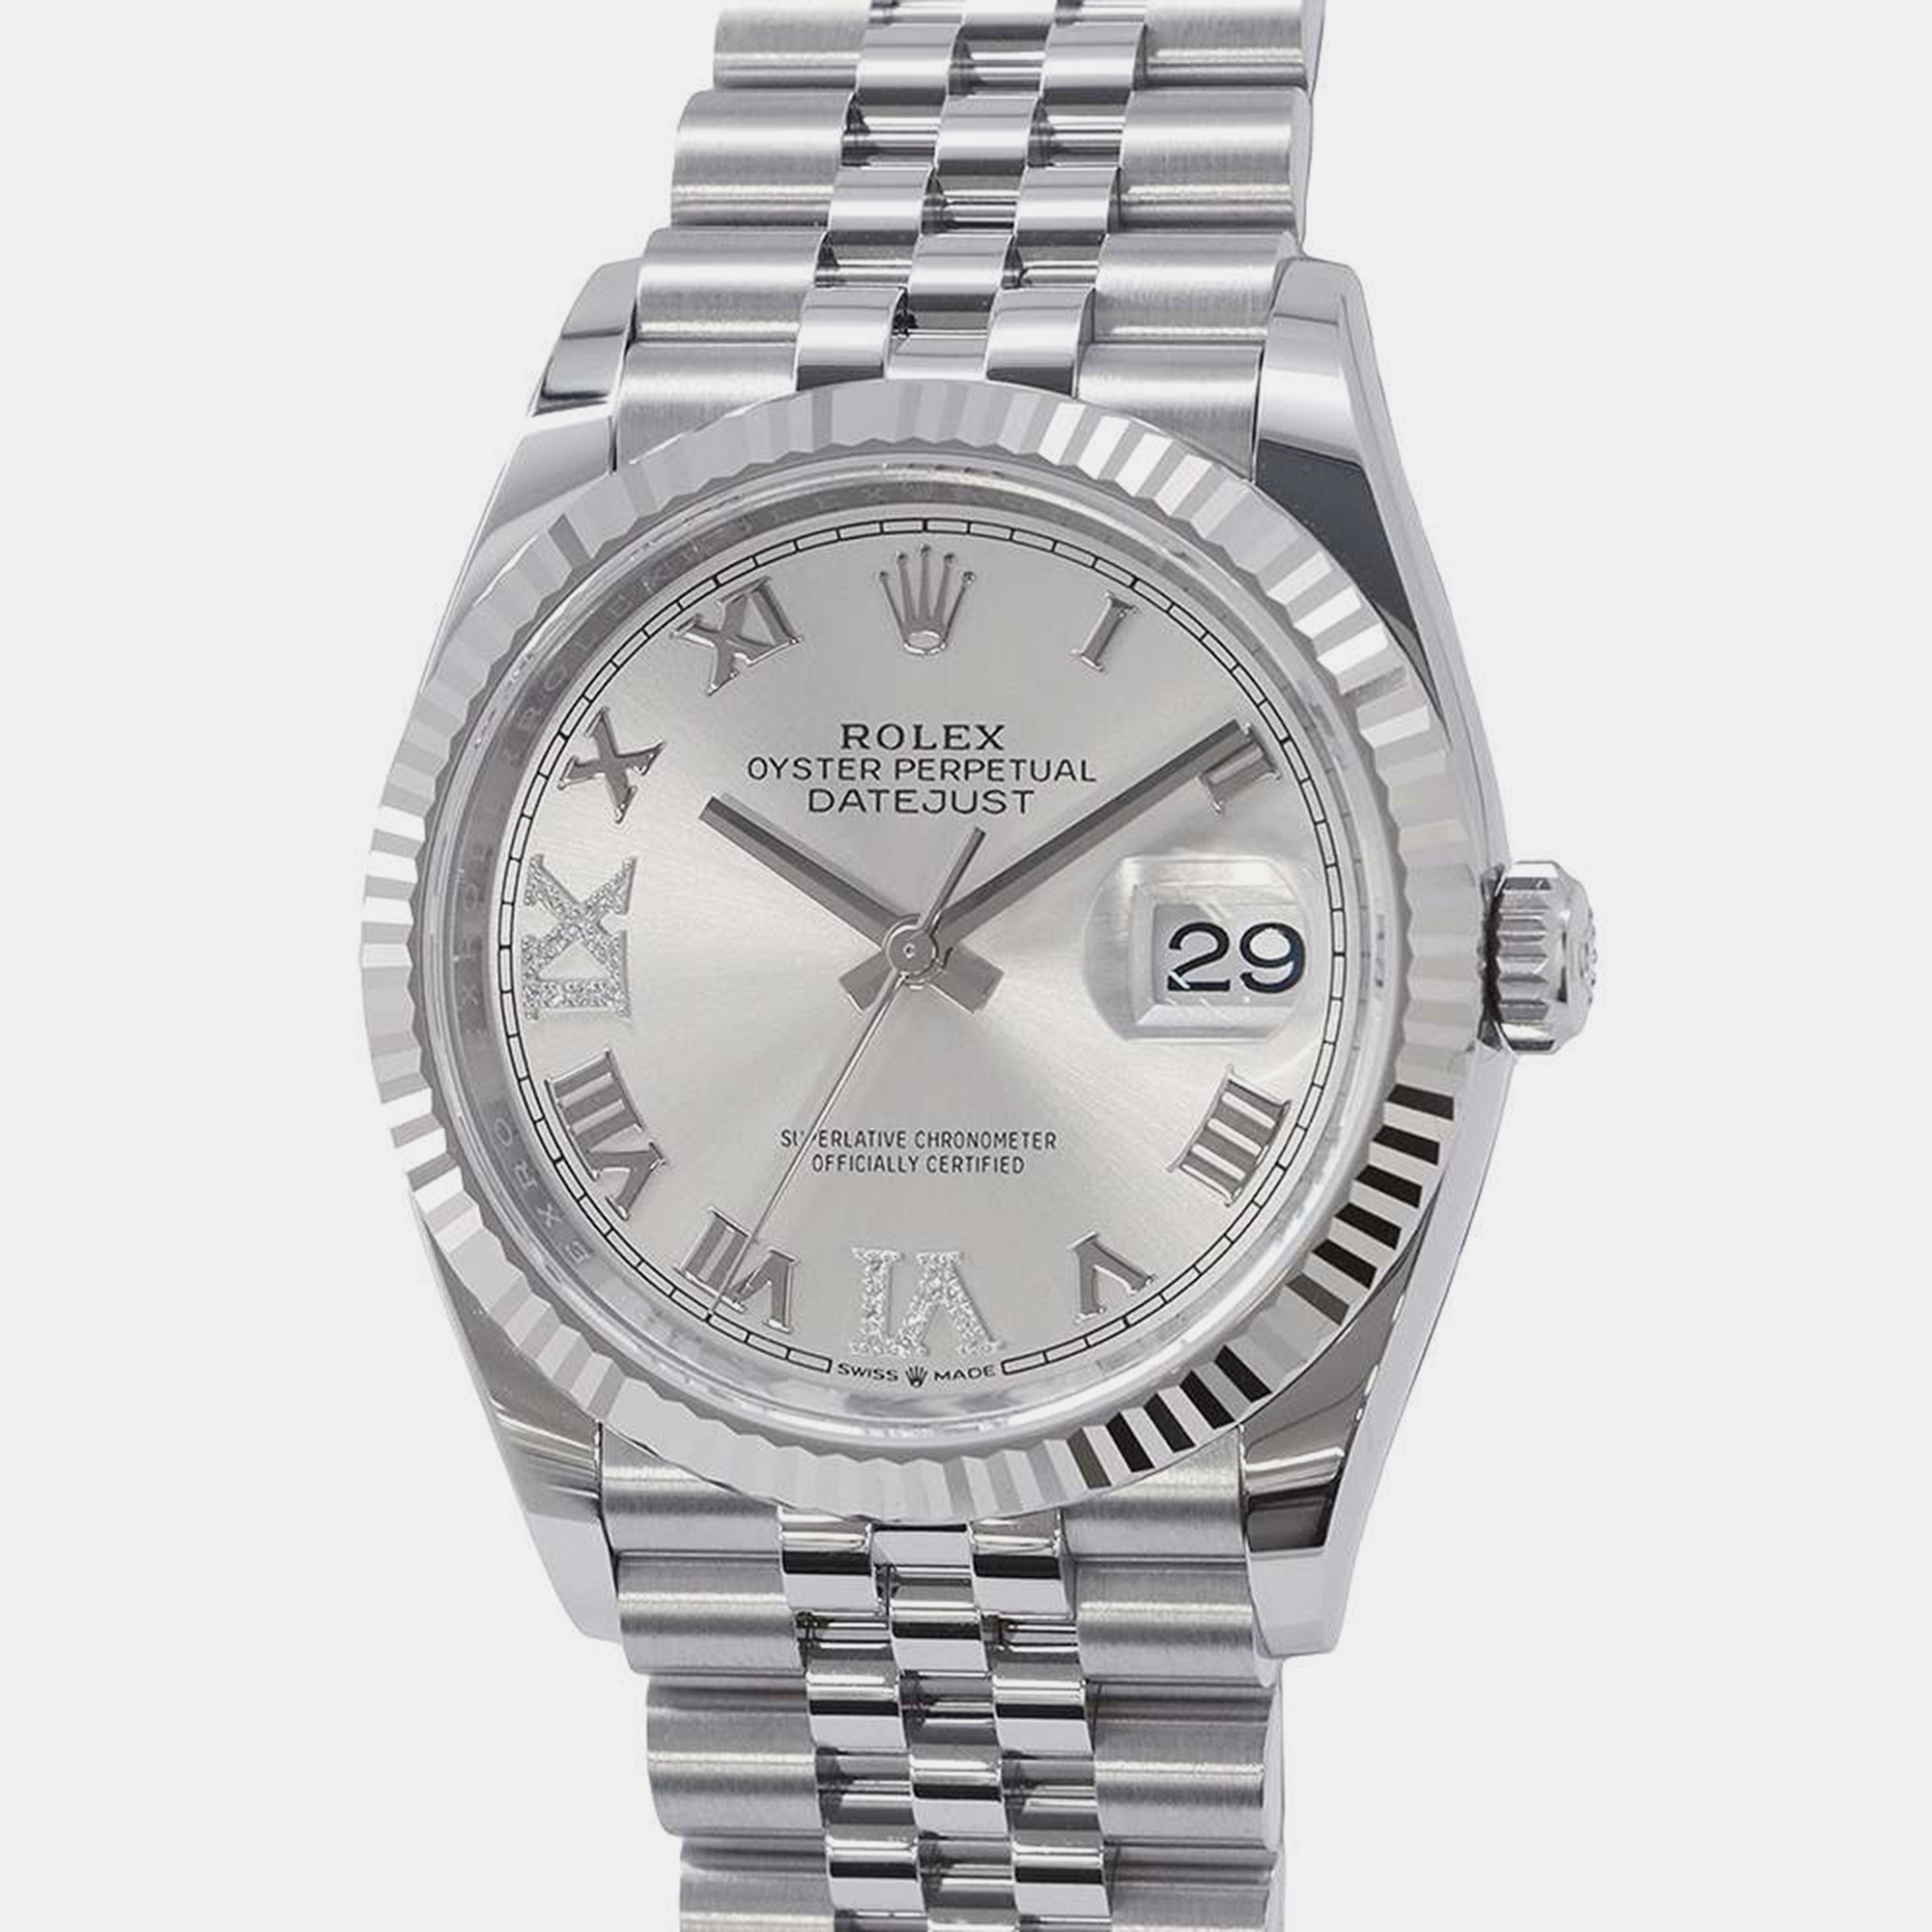 

Rolex Silver 18k White Gold Stainless Steel Datejust 126234 Automatic Men's Wristwatch 36 mm